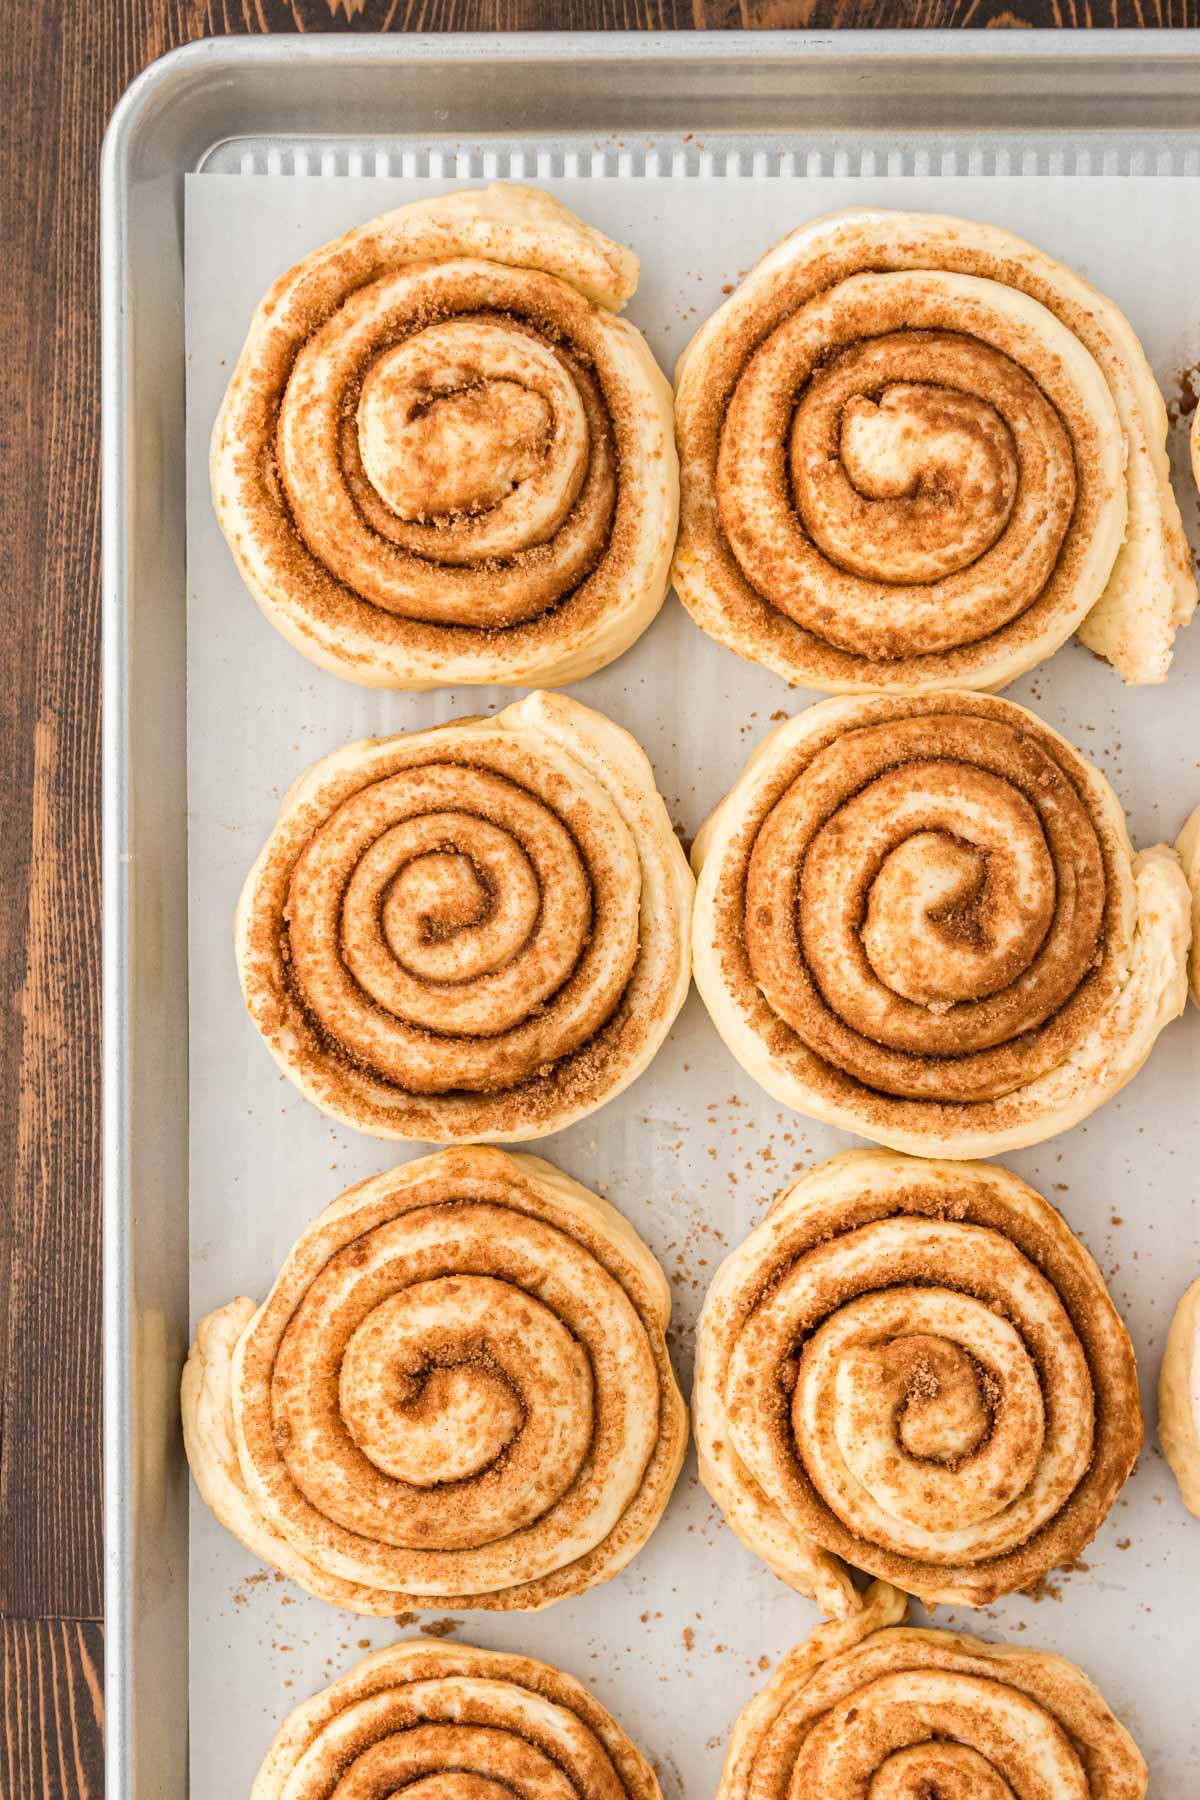 Cinnamon rolls on a parchment lined baking sheet.